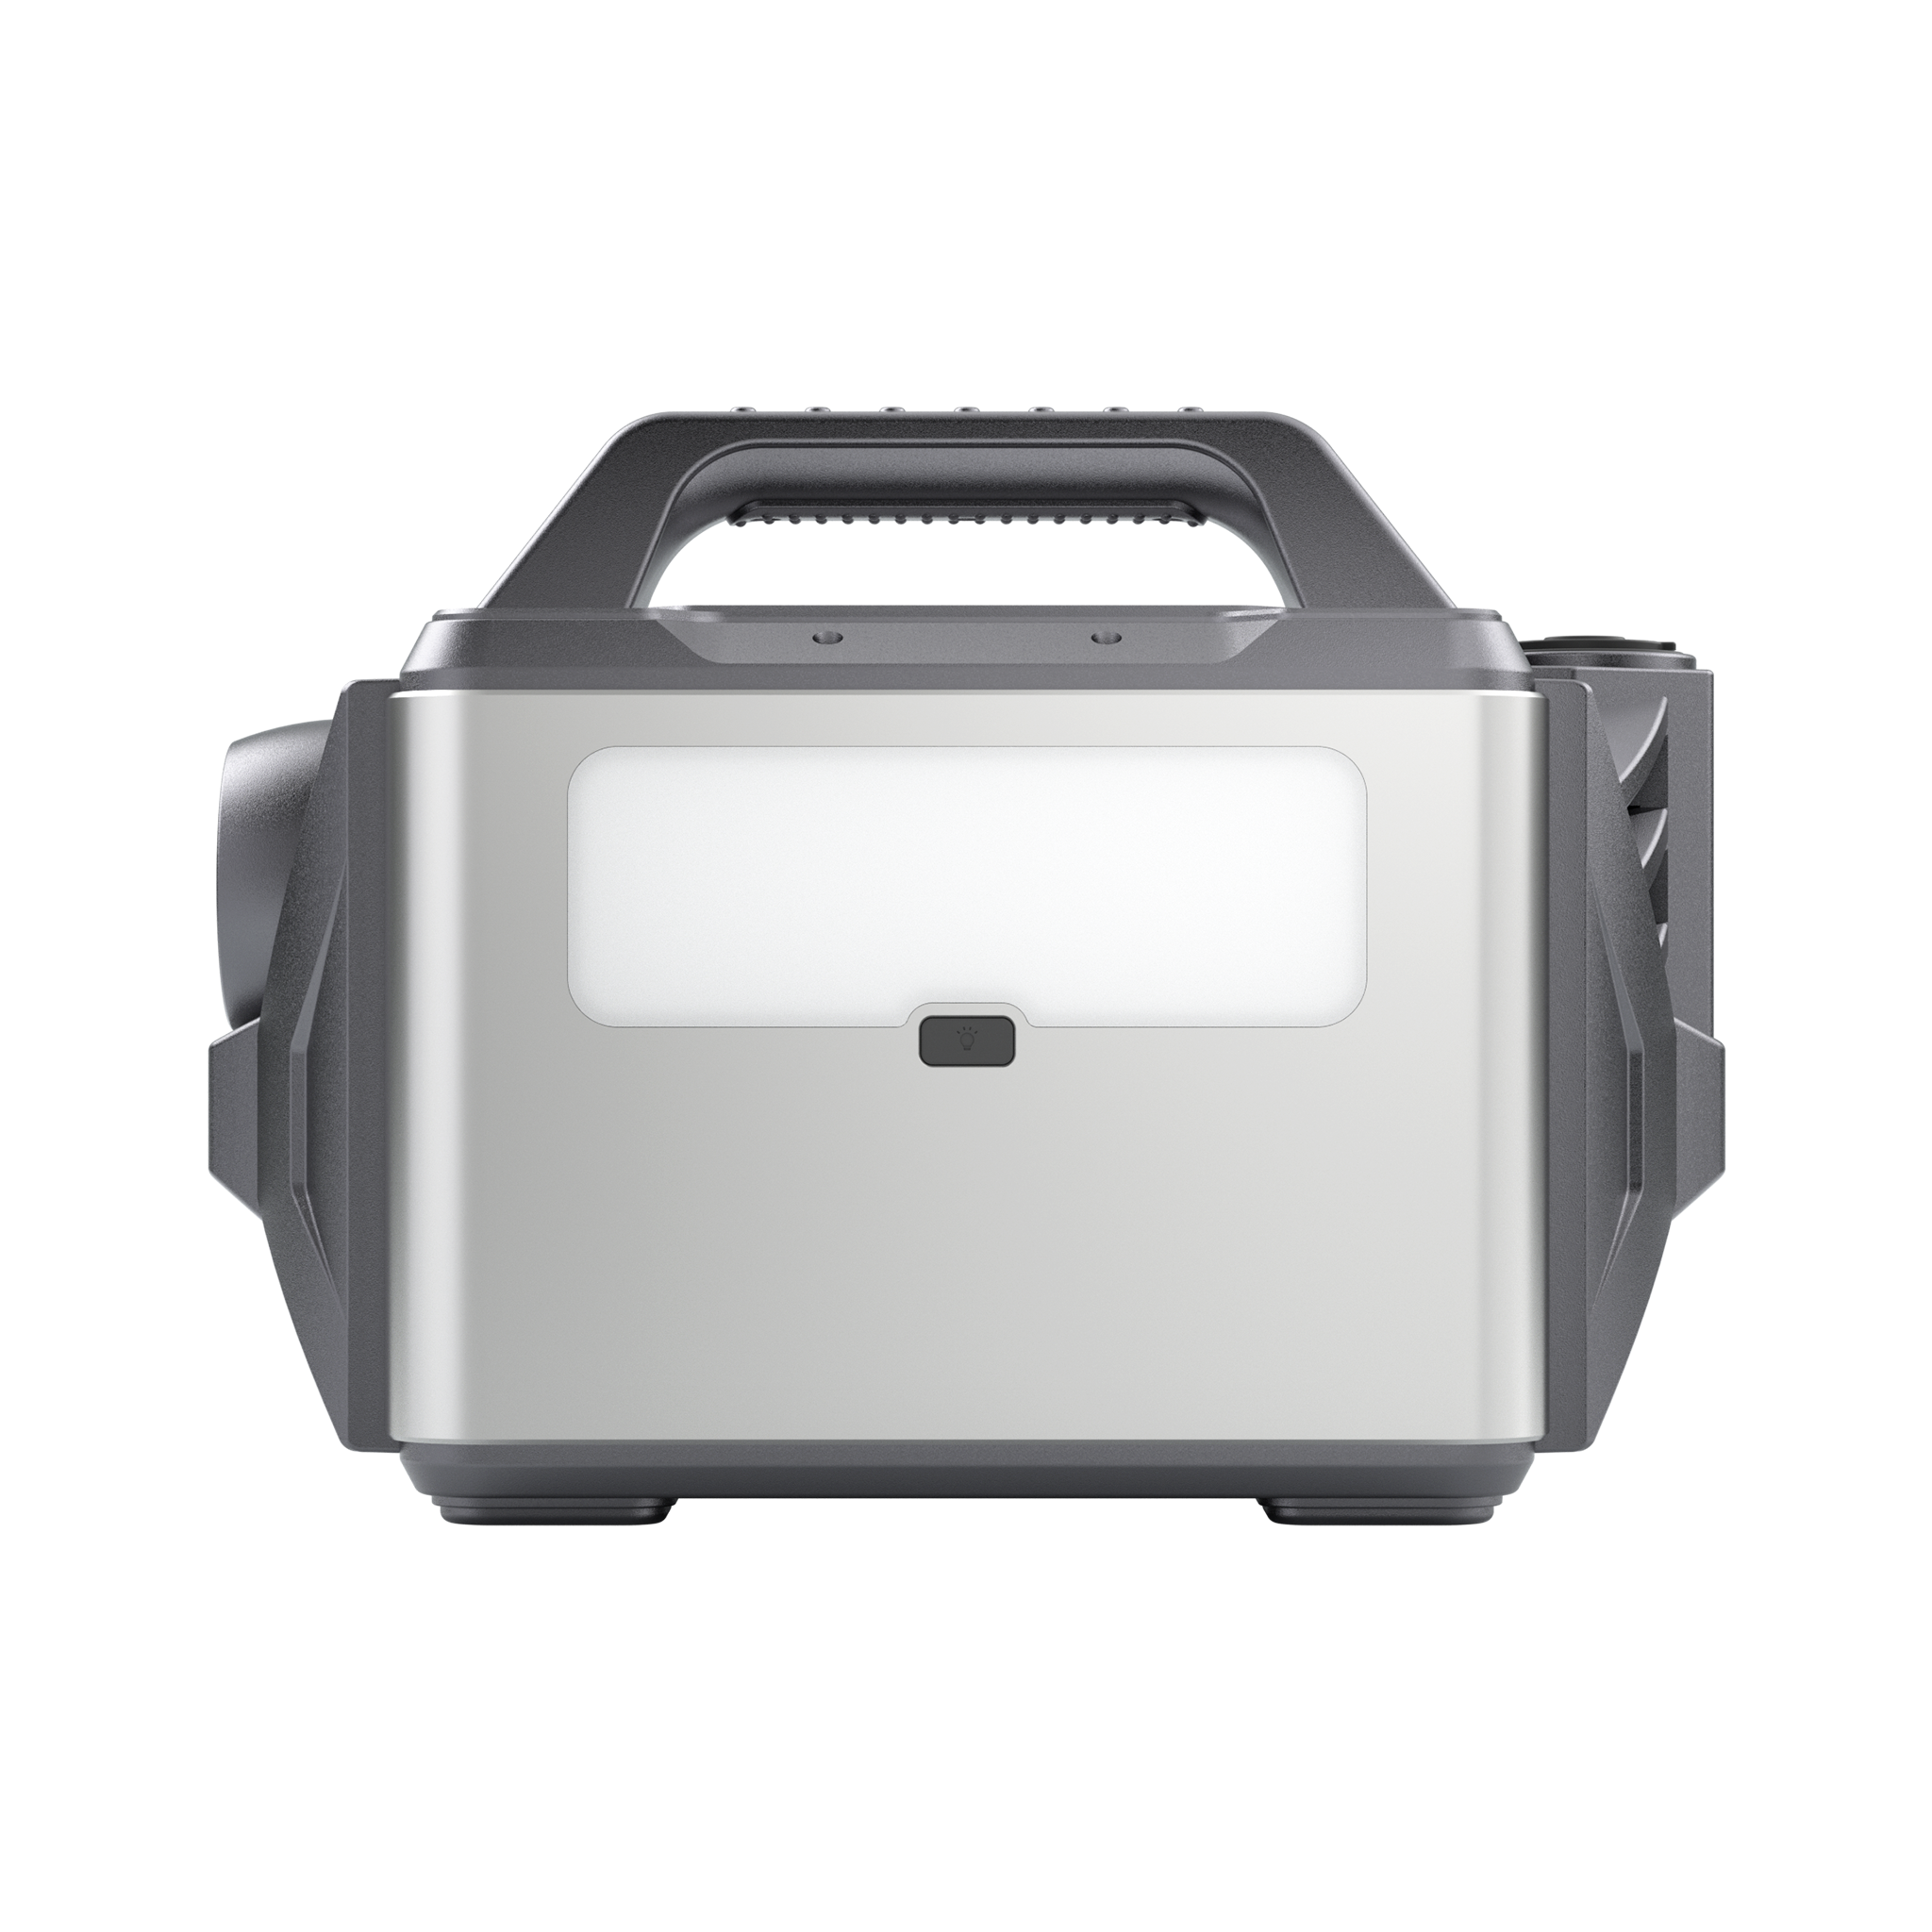 POWEREPUBLIC T306 portable power station, 300W 296Wh, metallic gray body with turbine-engine and aircraft wing design, a handle, and an LED light.